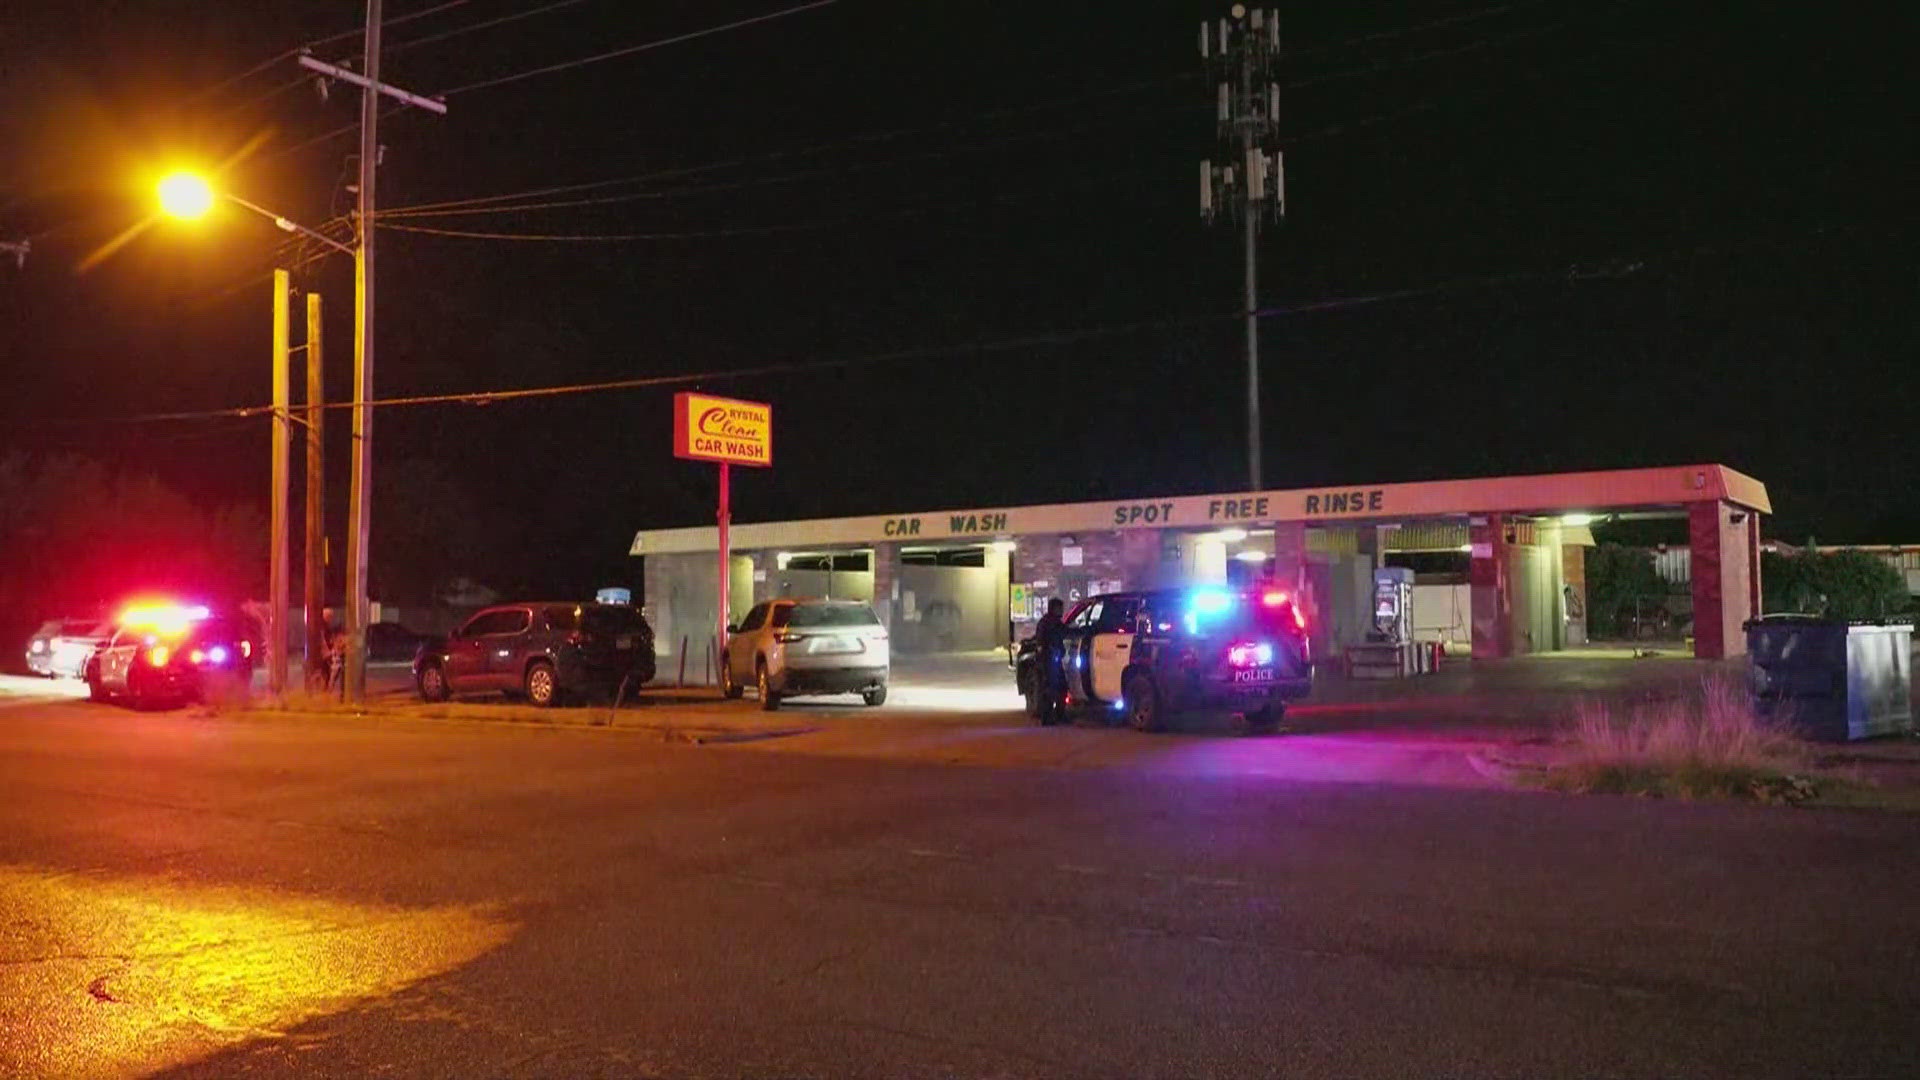 One suspect has been arrested so far in connection with a shooting at a car wash on West Cleburne Road.